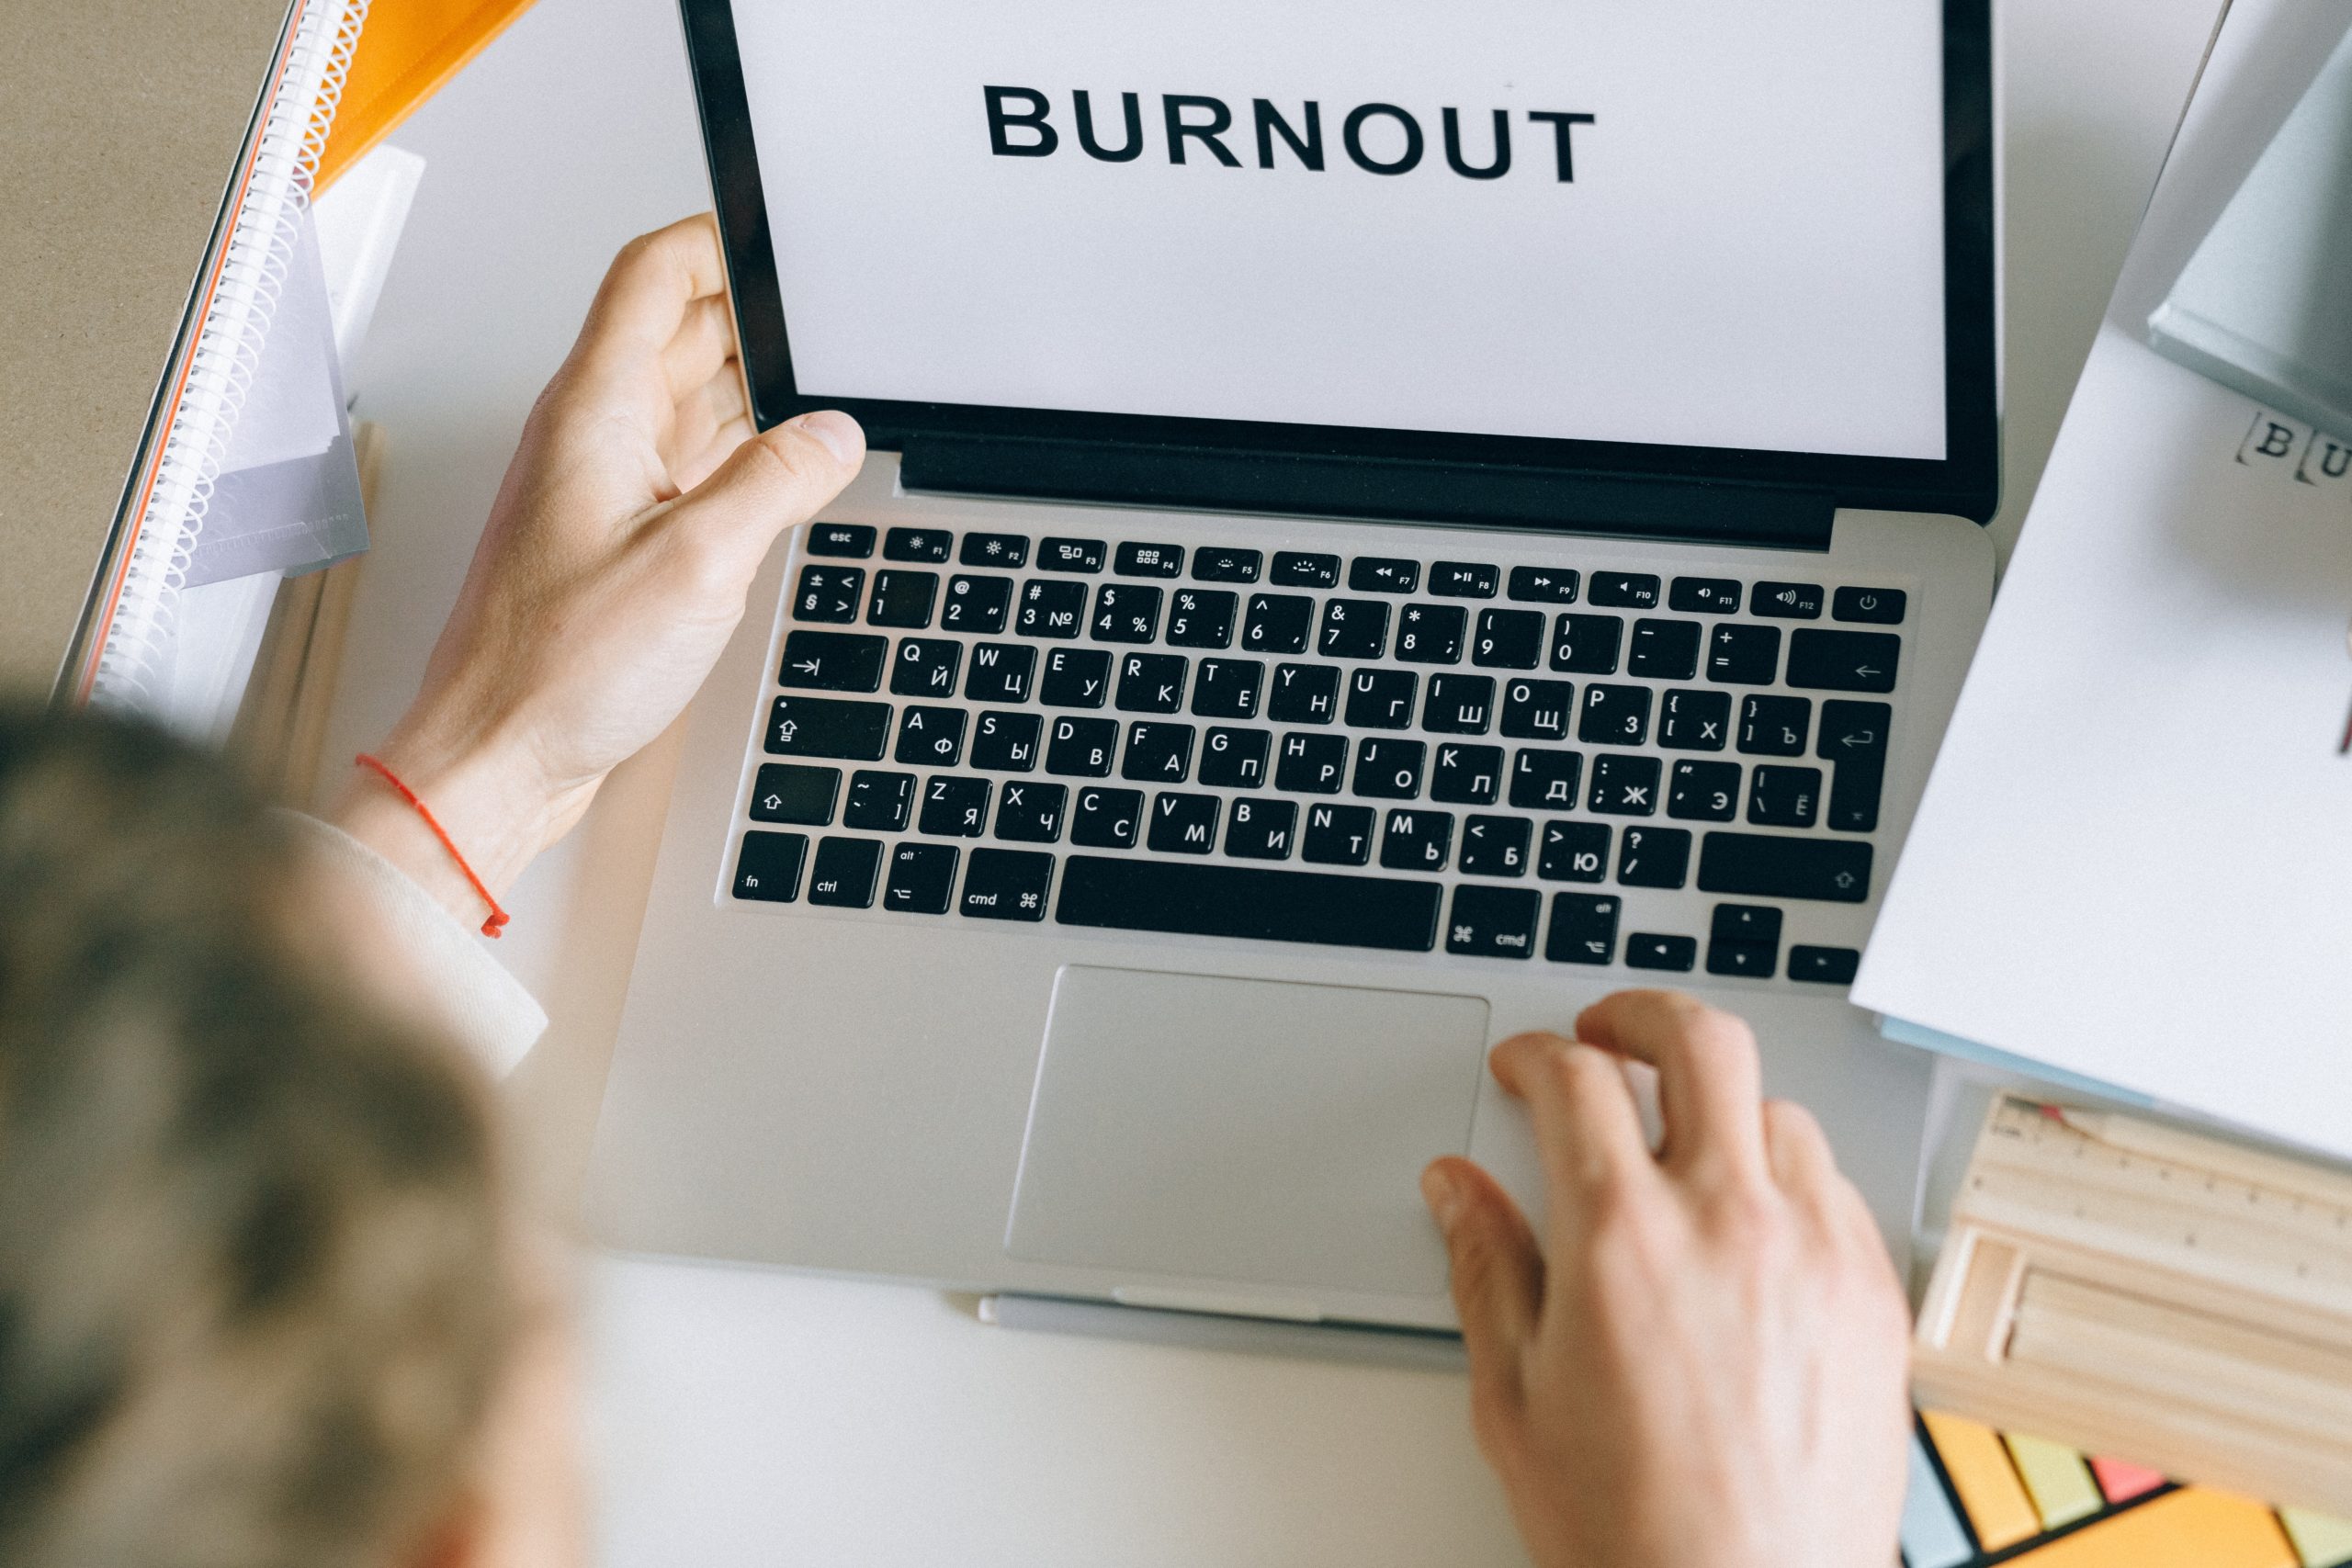 8 Ways Social Workers Can Prevent Burnout